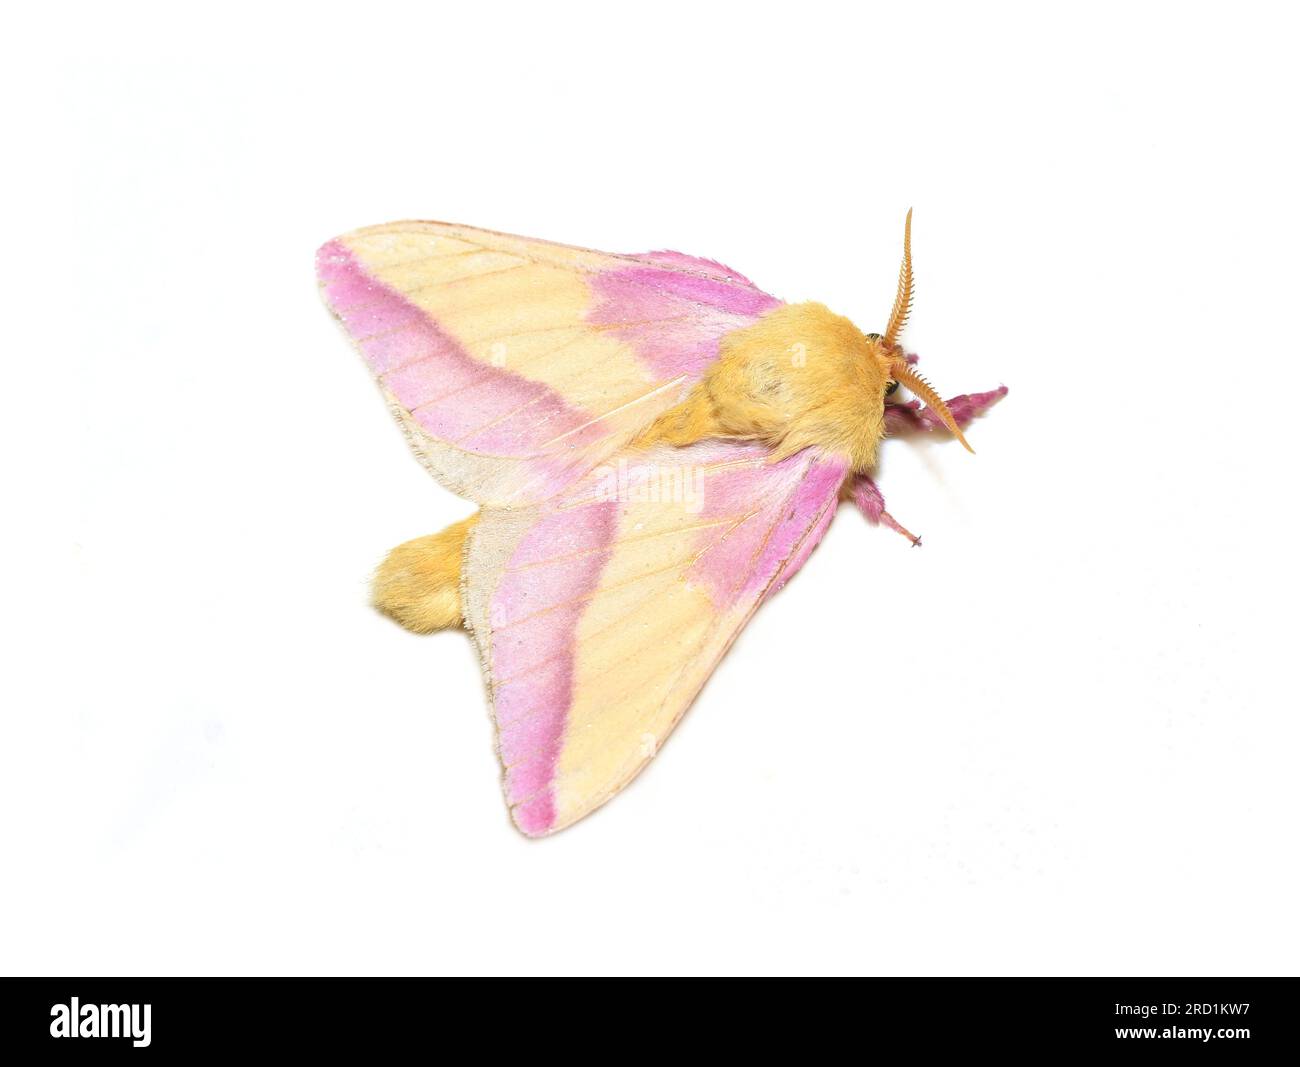 Dryocampa rubicunda the pink and yellow rosy maple moth on white background Stock Photo